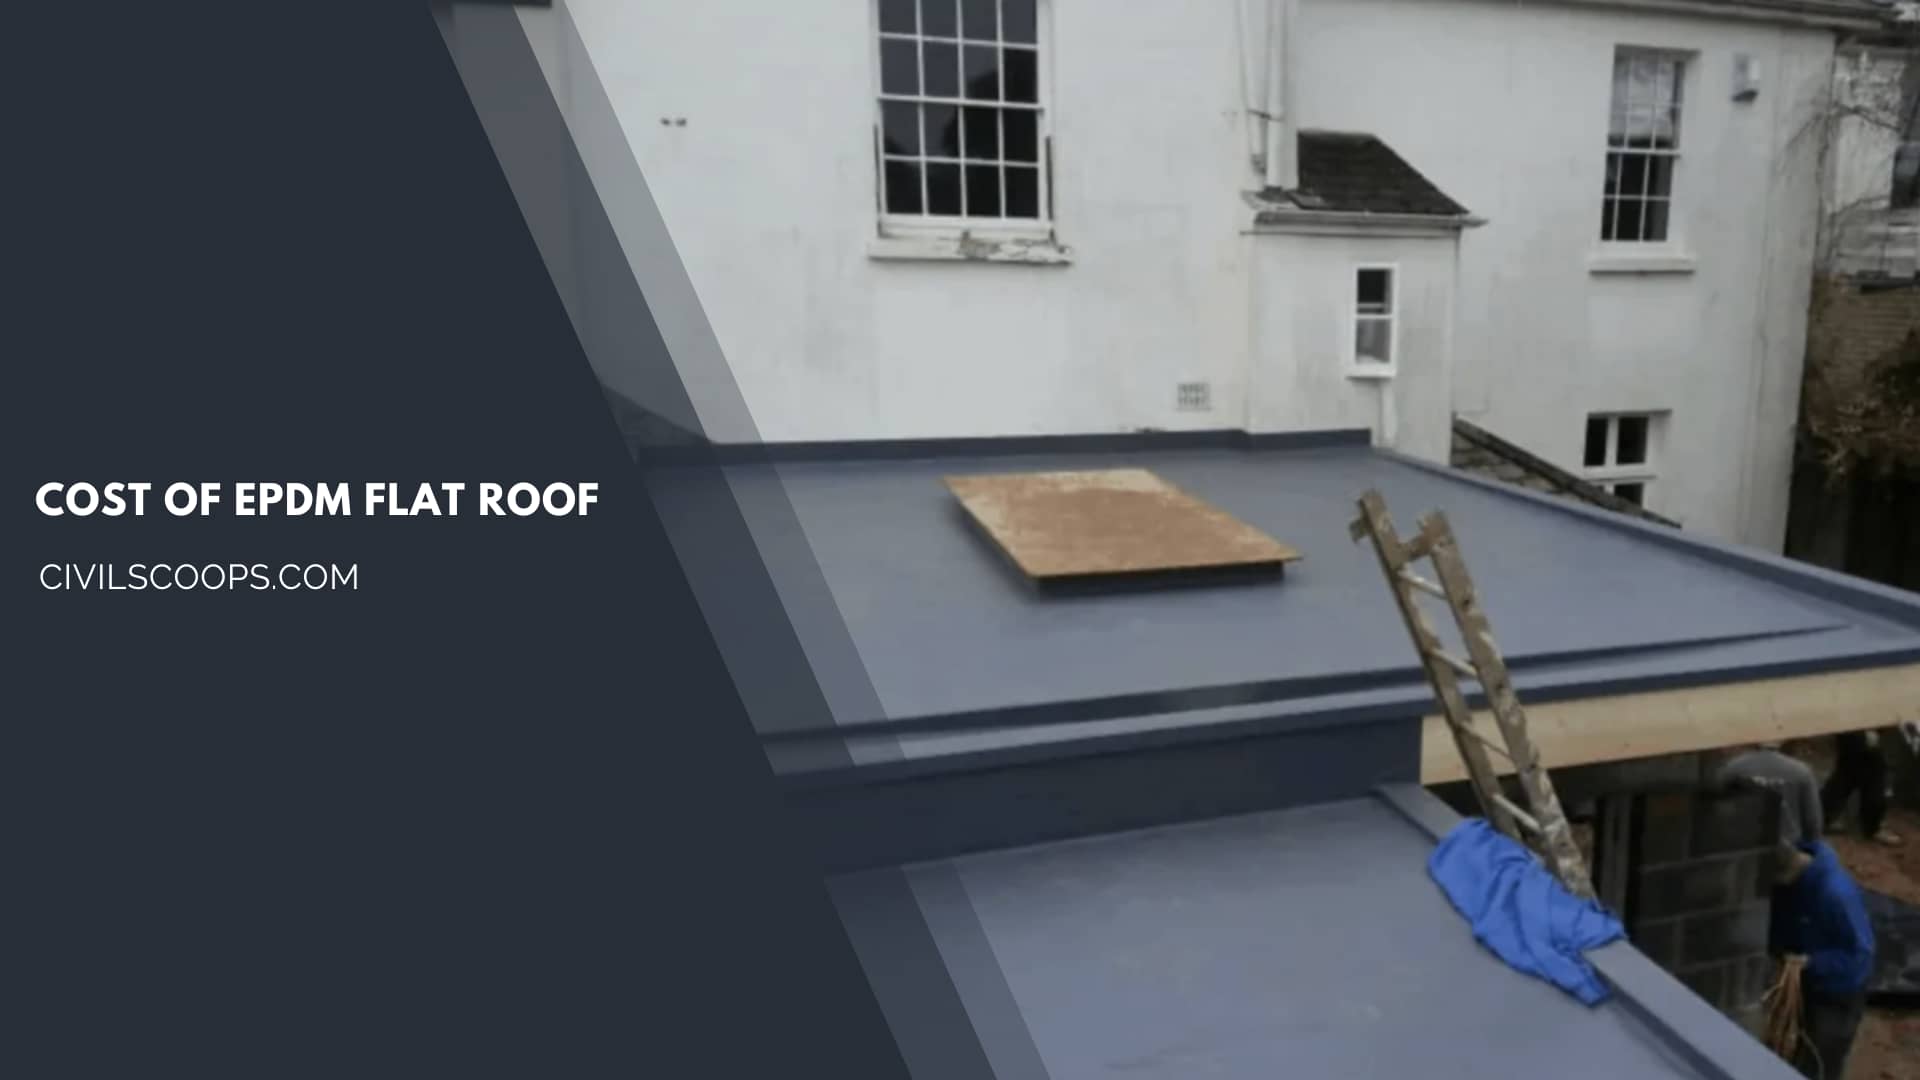 Cost of EPDM Flat Roof